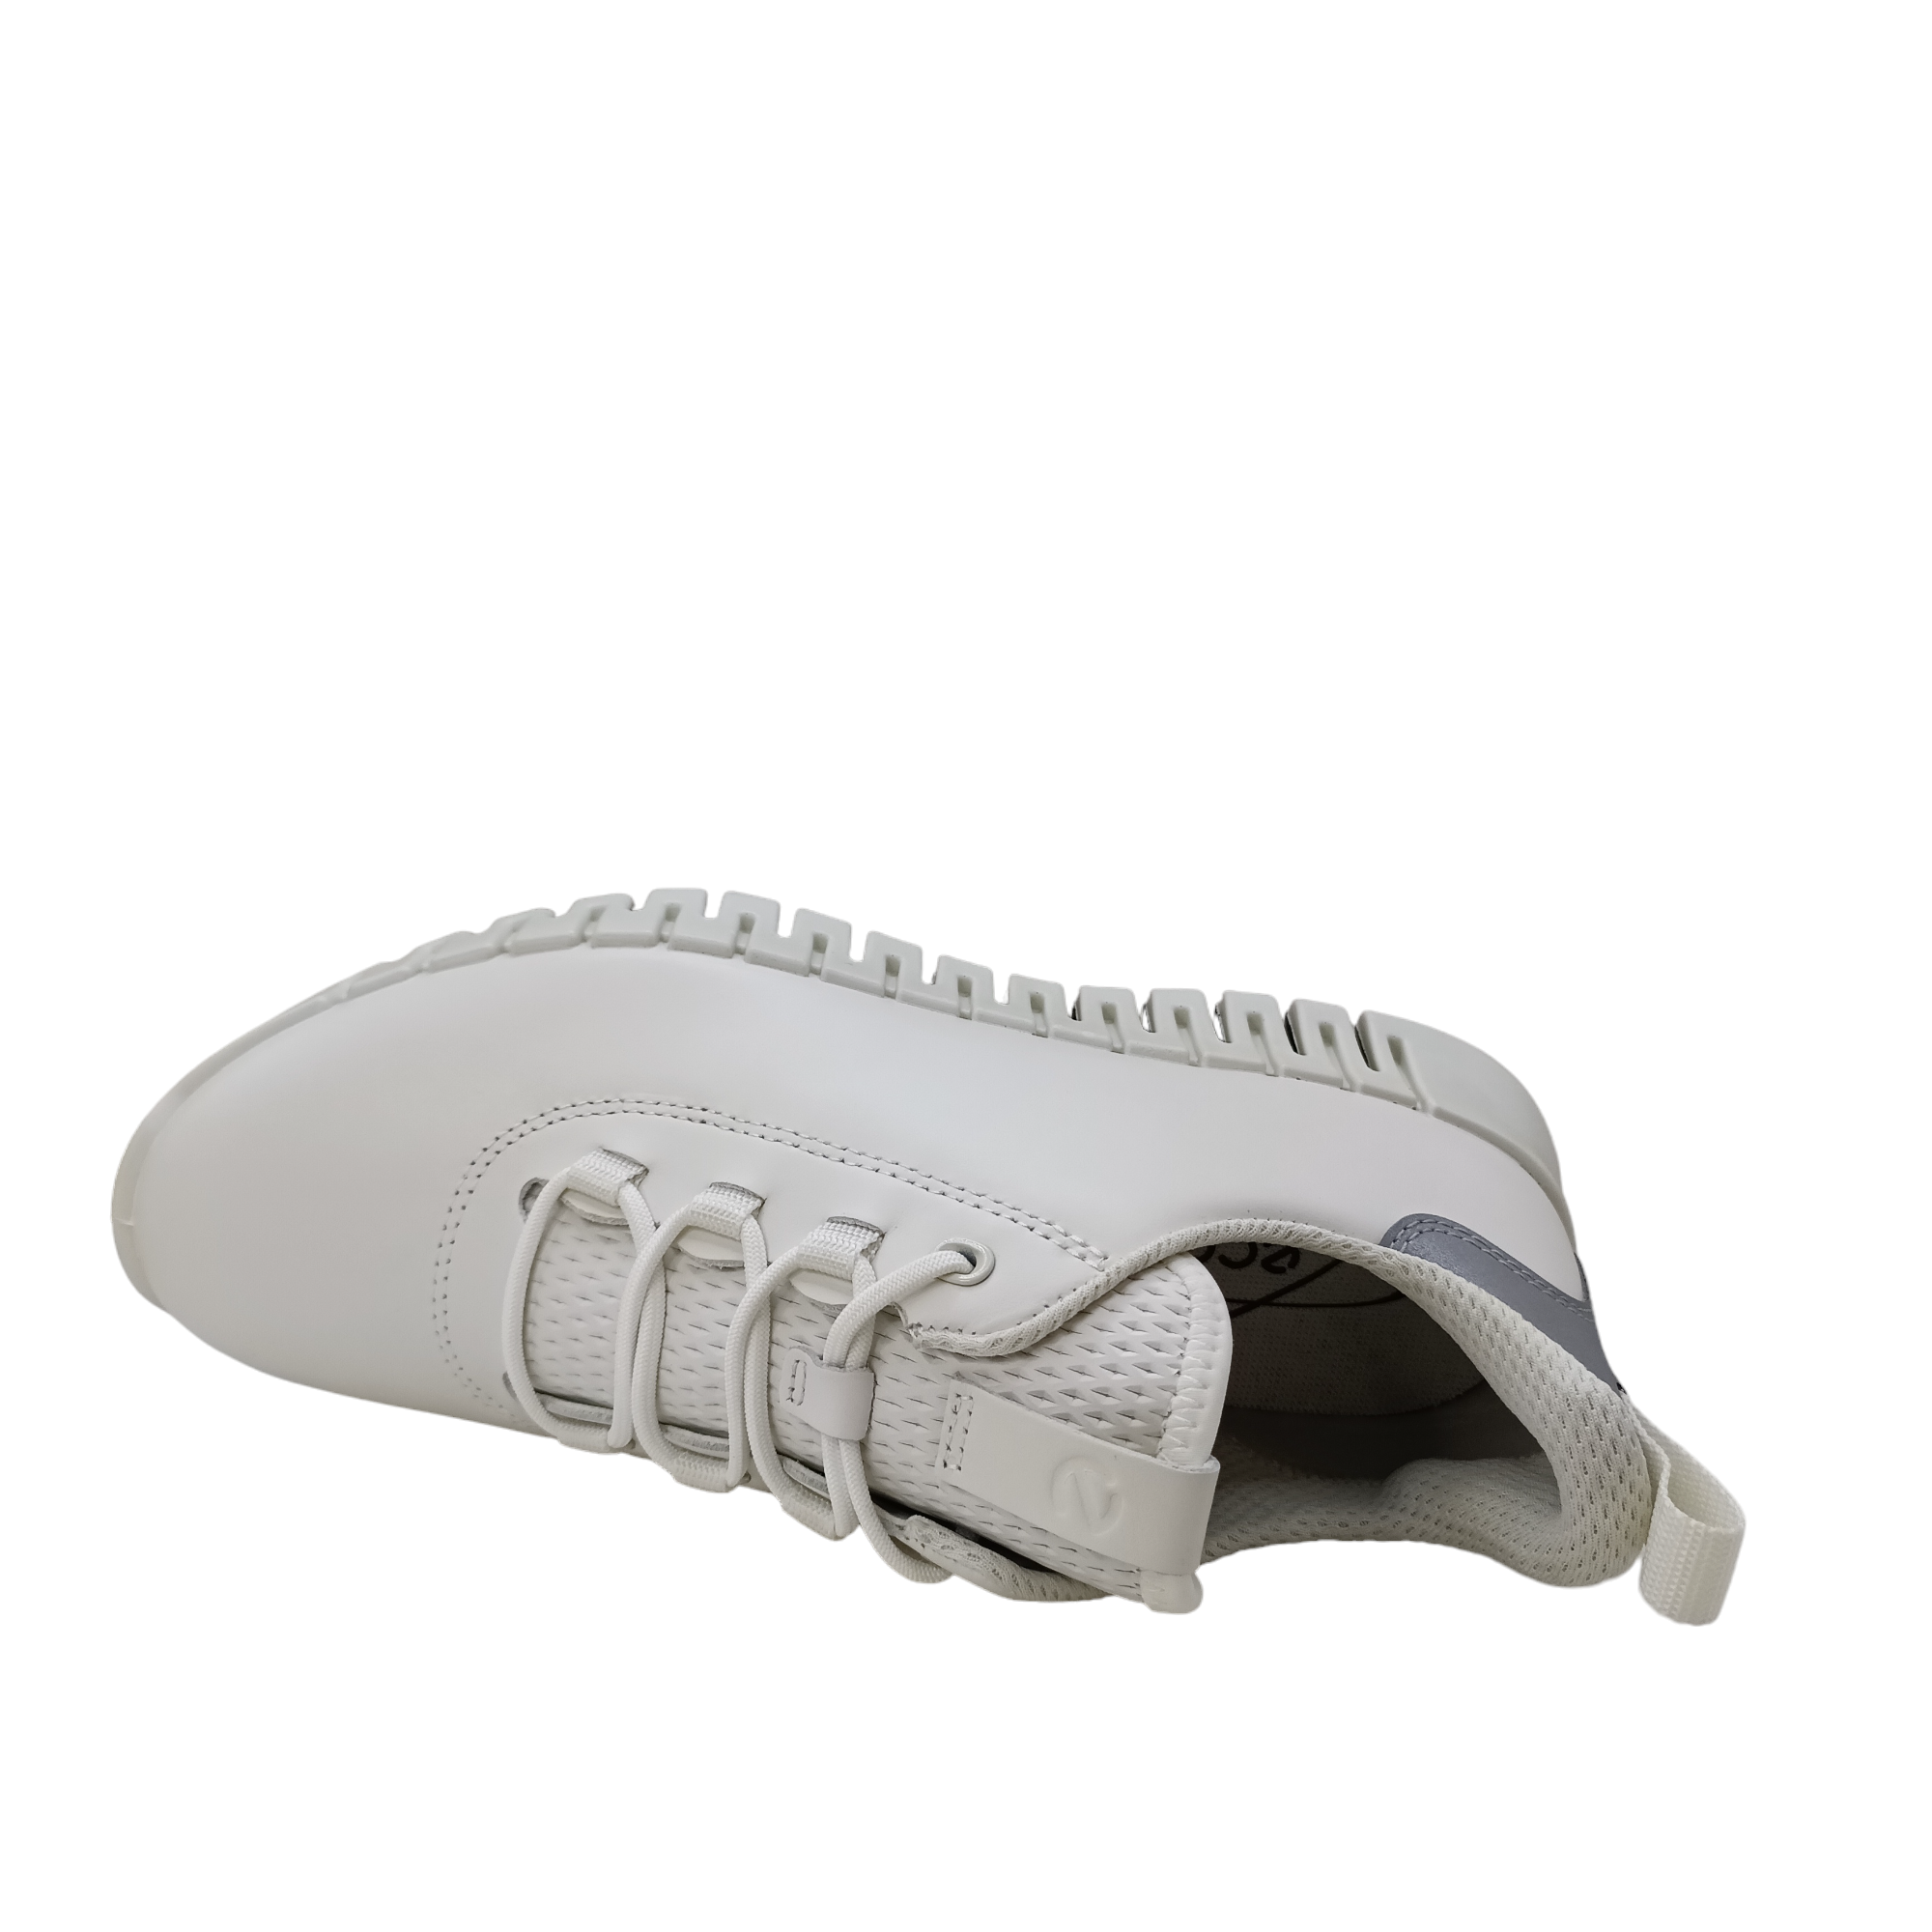 Shop Gruuv Sneaker W - with shoe&amp;me - from Ecco - Sneakers - Sneaker, Winter, Womens